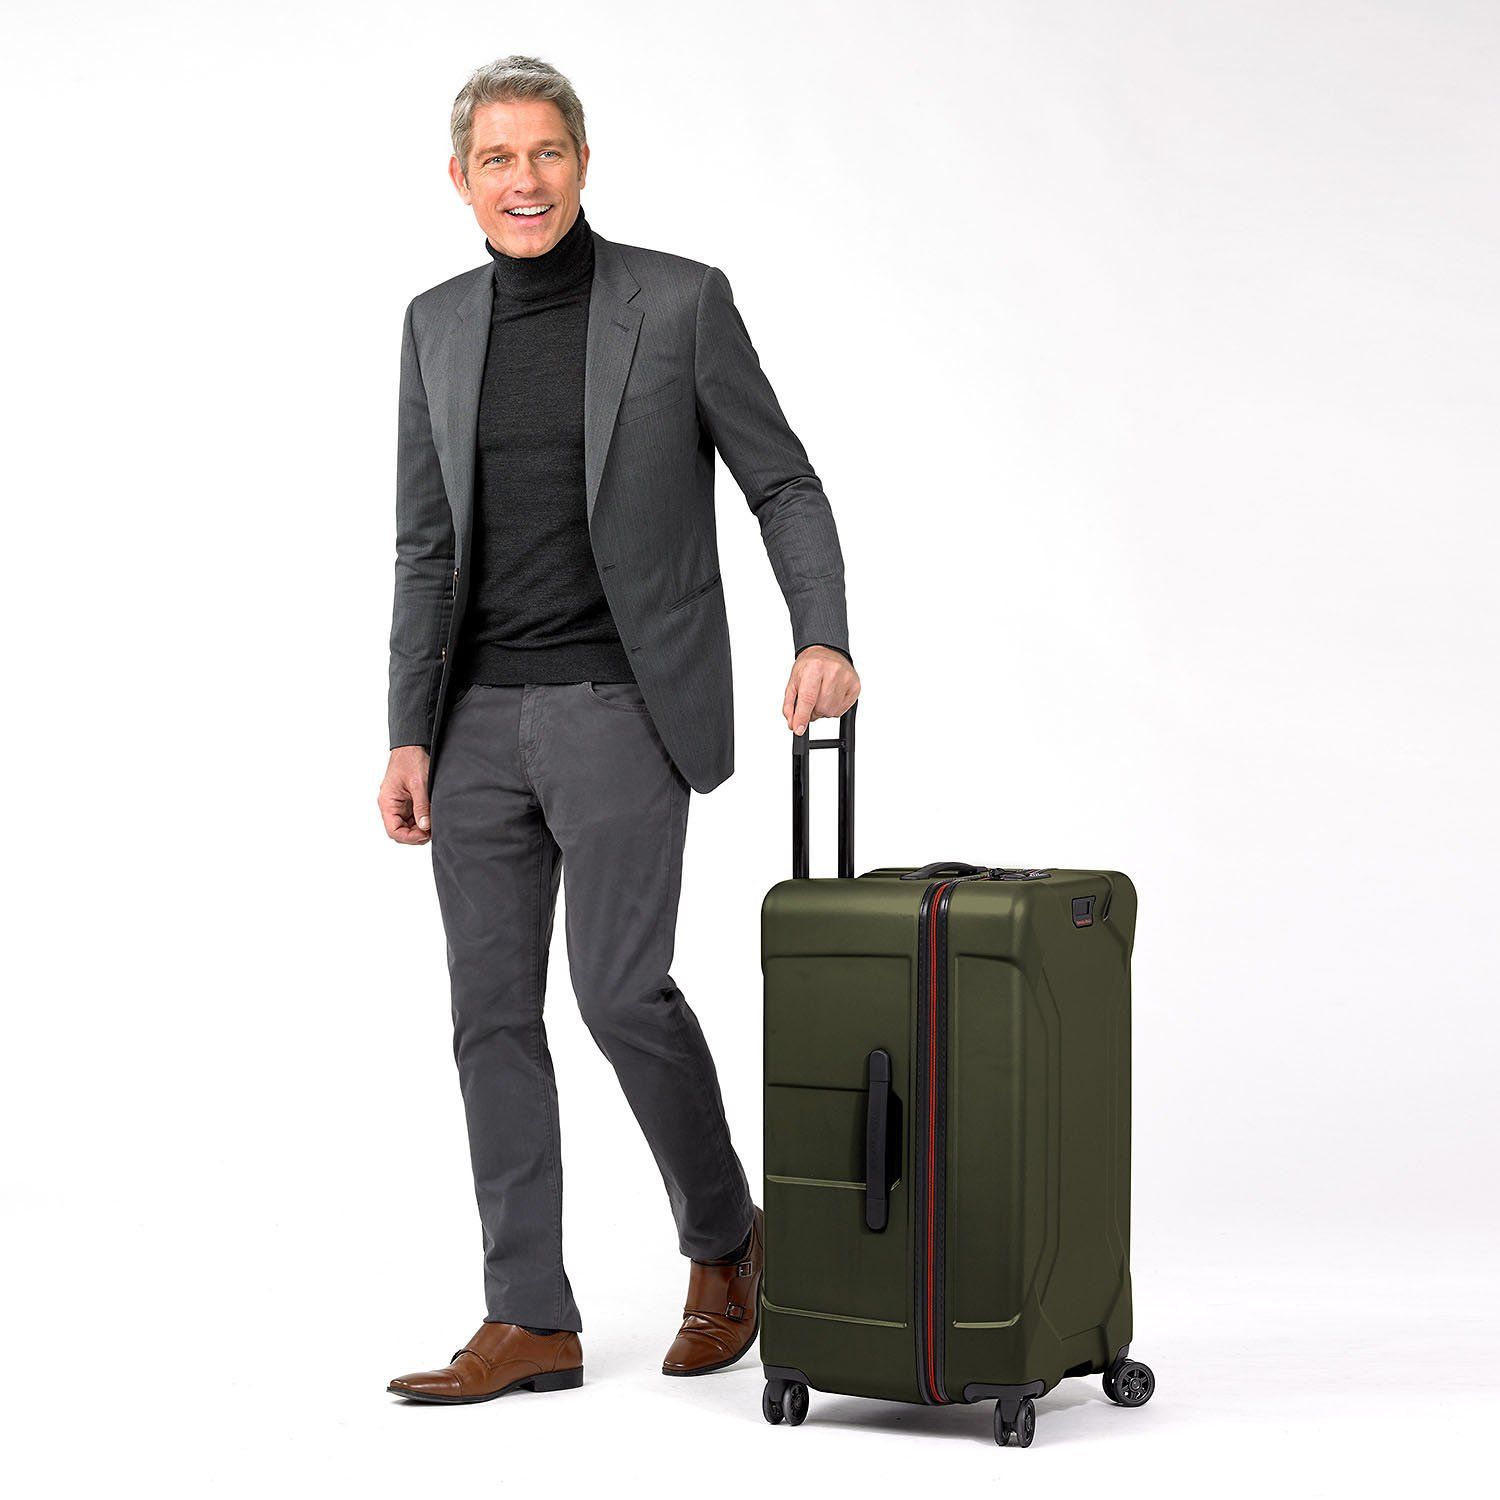 Lighter than a trunk, bigger than a suitcase -- you get the best of both worlds with the Torq Medium Trunk Spinner. The rugged, resilient hardside case means ultimate protection for all your belongings. Key features include: Outsider® handle provides greater interior capacity and a smooth surface for packing so clothes arrive wrinkle-free. Monogrammable leather nameplate to customise with your initials; easily removable and replaceable. Cavernous main compartment accommodates a large variety of bulky clothing or odd-shaped items; lid pocket can either be used as a suiter or as additional packing space. 80/20 lid opening allows bag to be packed like a traditional suitcase on a luggage rack. 3-layer, 100% virgin Makrolon® polycarbonate material is high-strength, lightweight, and provides elasticity and resiliency.